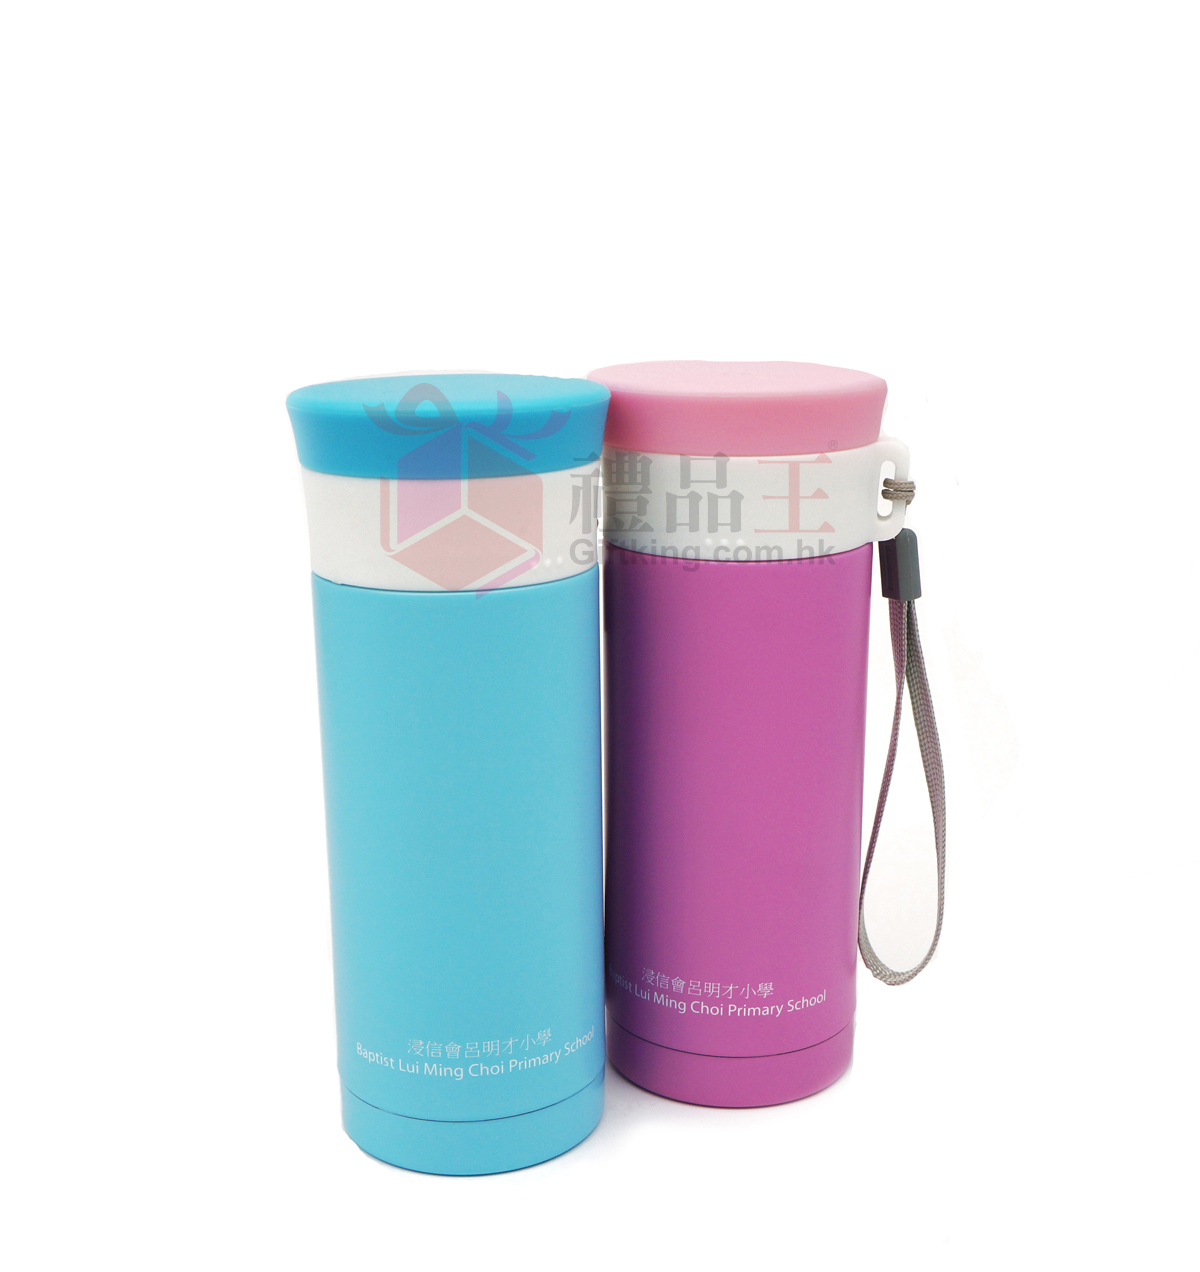 Baptist Lui Ming Choi Primary School thermos bottle (Houseware gift)